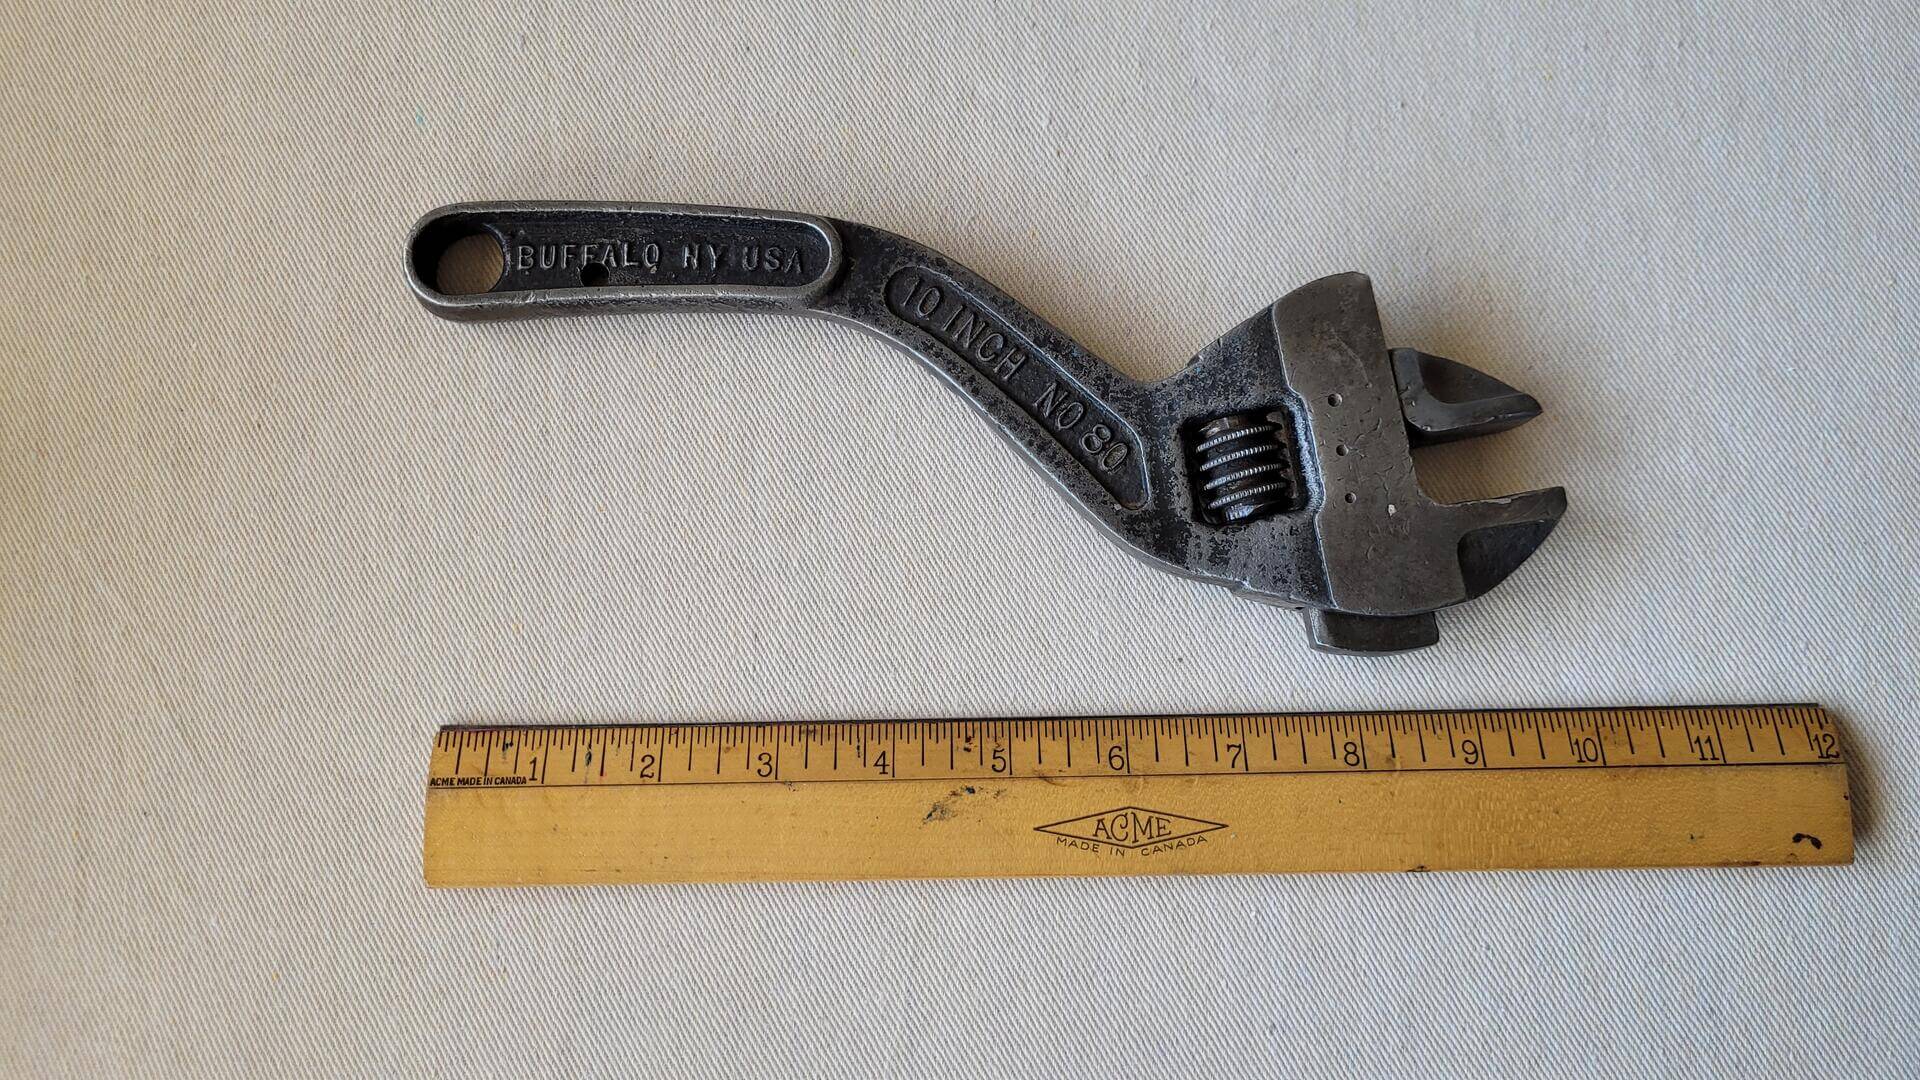 Vintage Westcott No. 80 10" S-curved adjustable wrench by the Keystone Mfg Co. Buffalo, NY. Antique made in USA collectible automotive & machinist tools